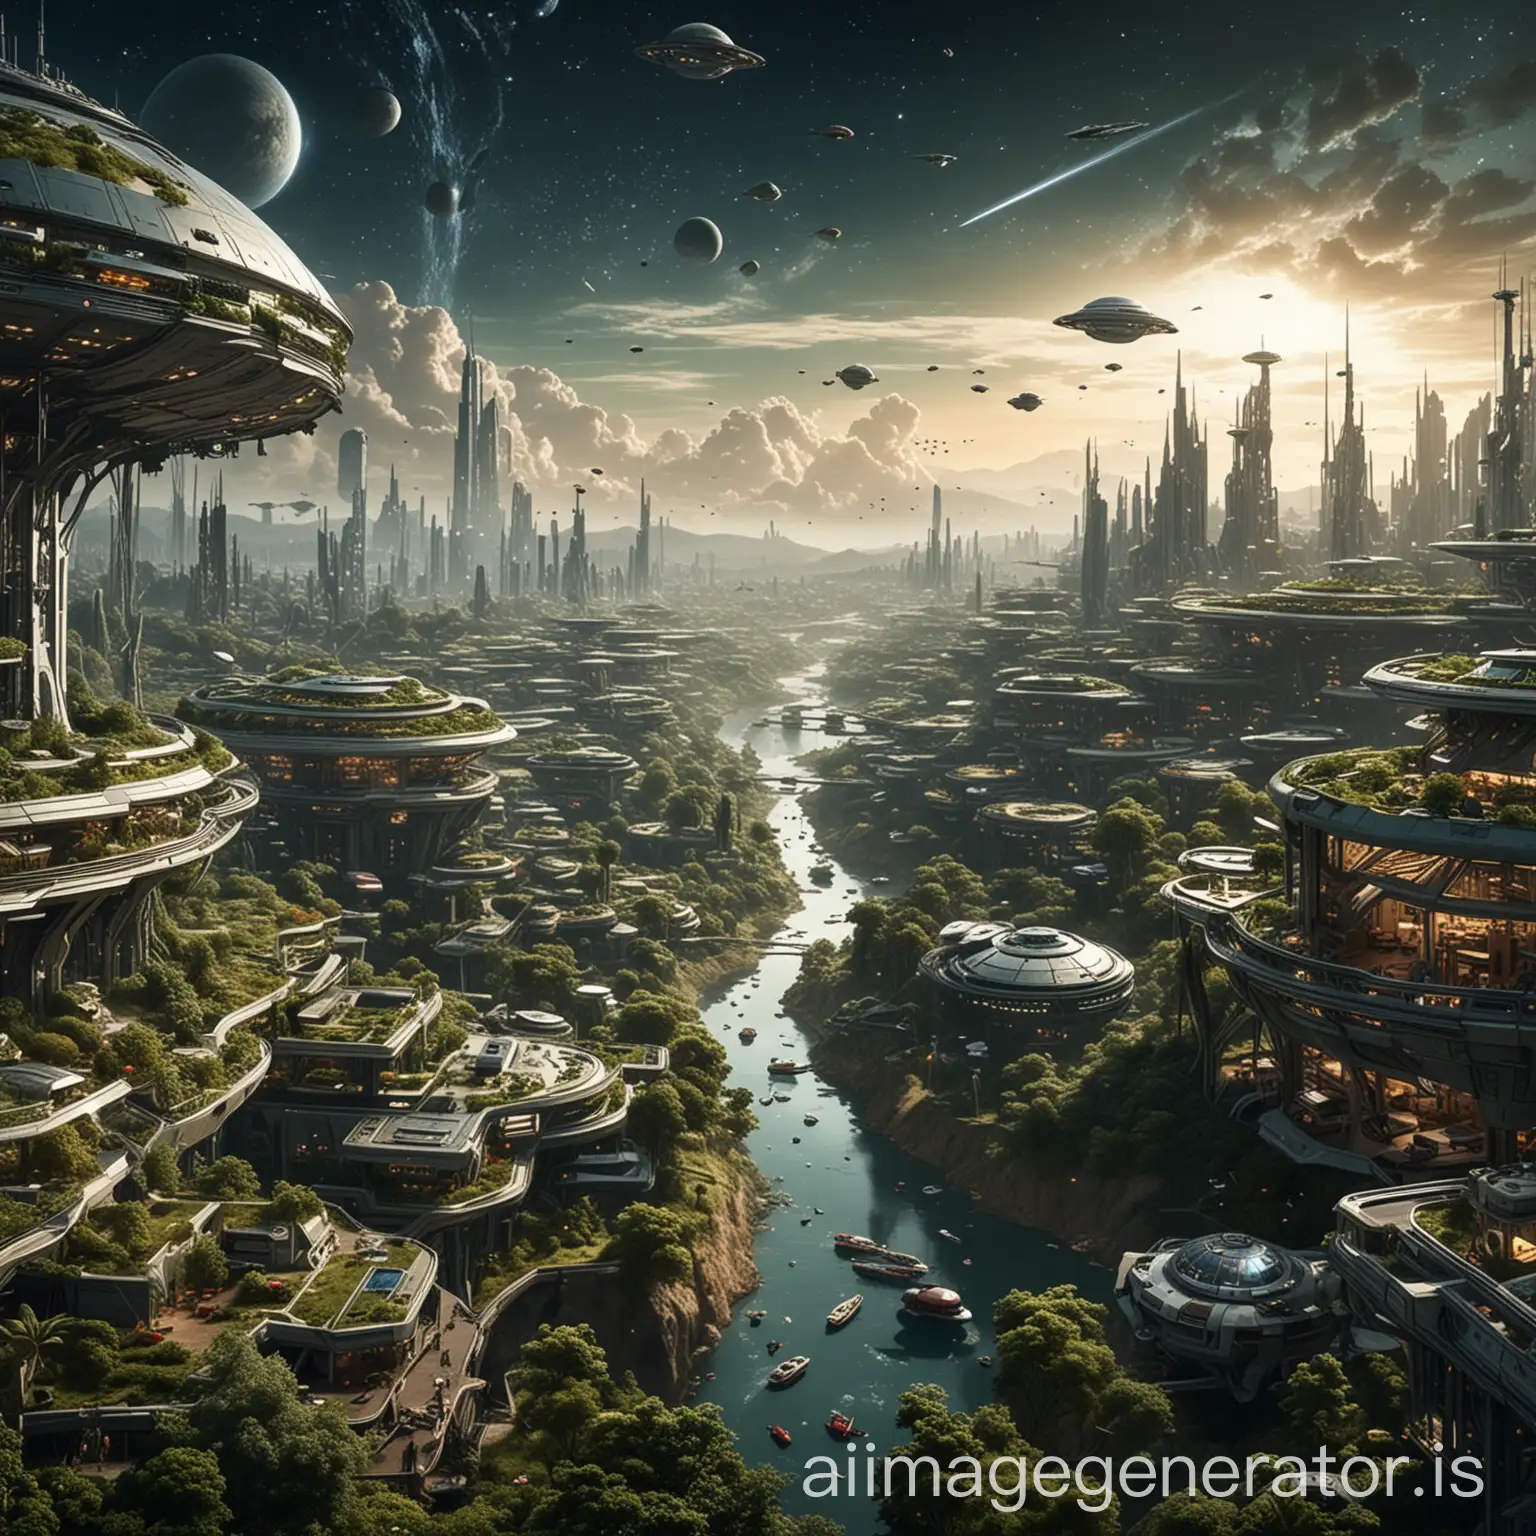 a densely populated settlement of the future surrounded by parks and greenery in every house and birds with a backdrop of outer space and interstellar ships